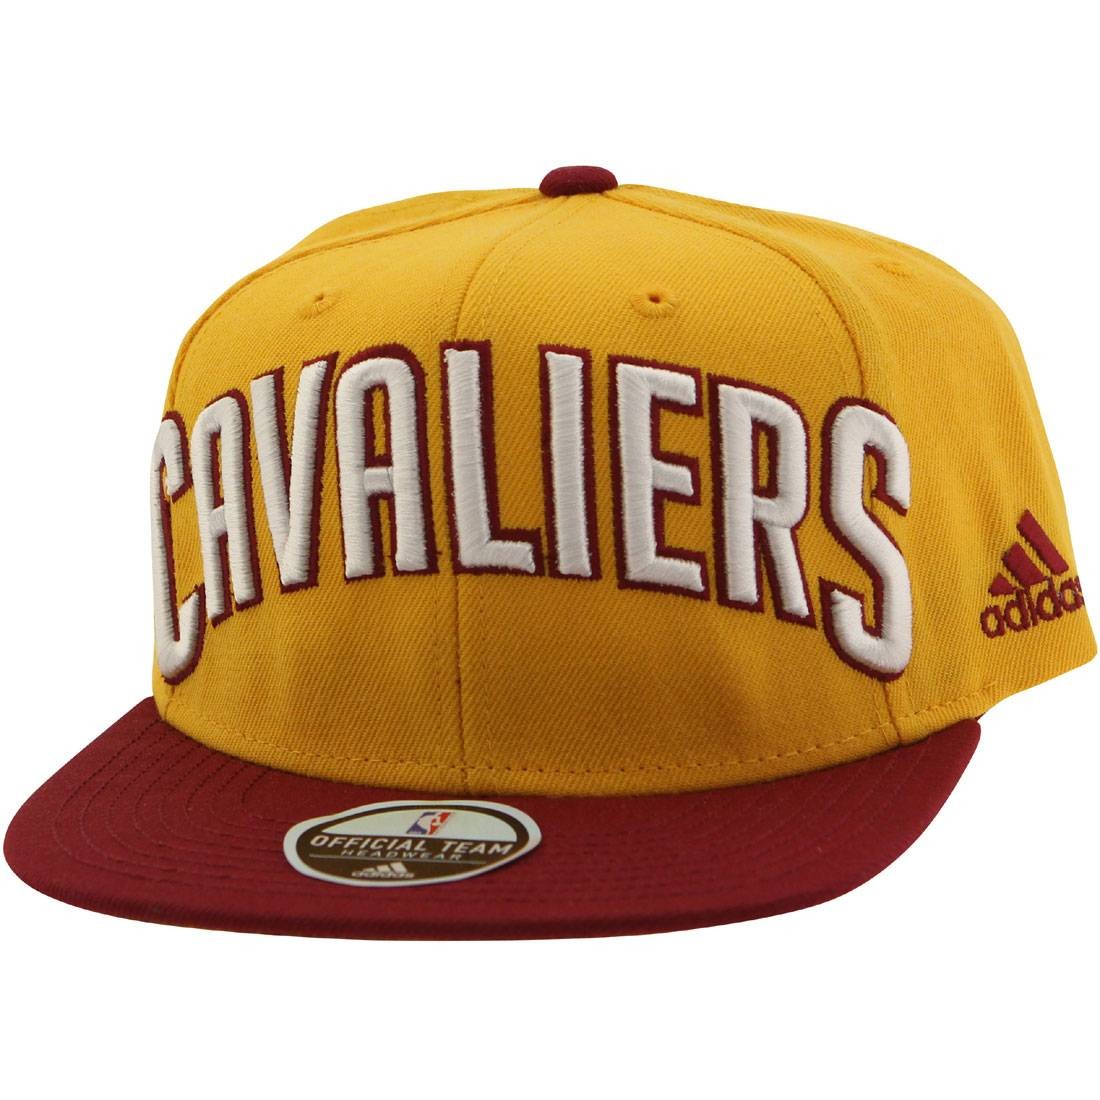 NBA Cleveland Cavaliers キャップ - 応援グッズ